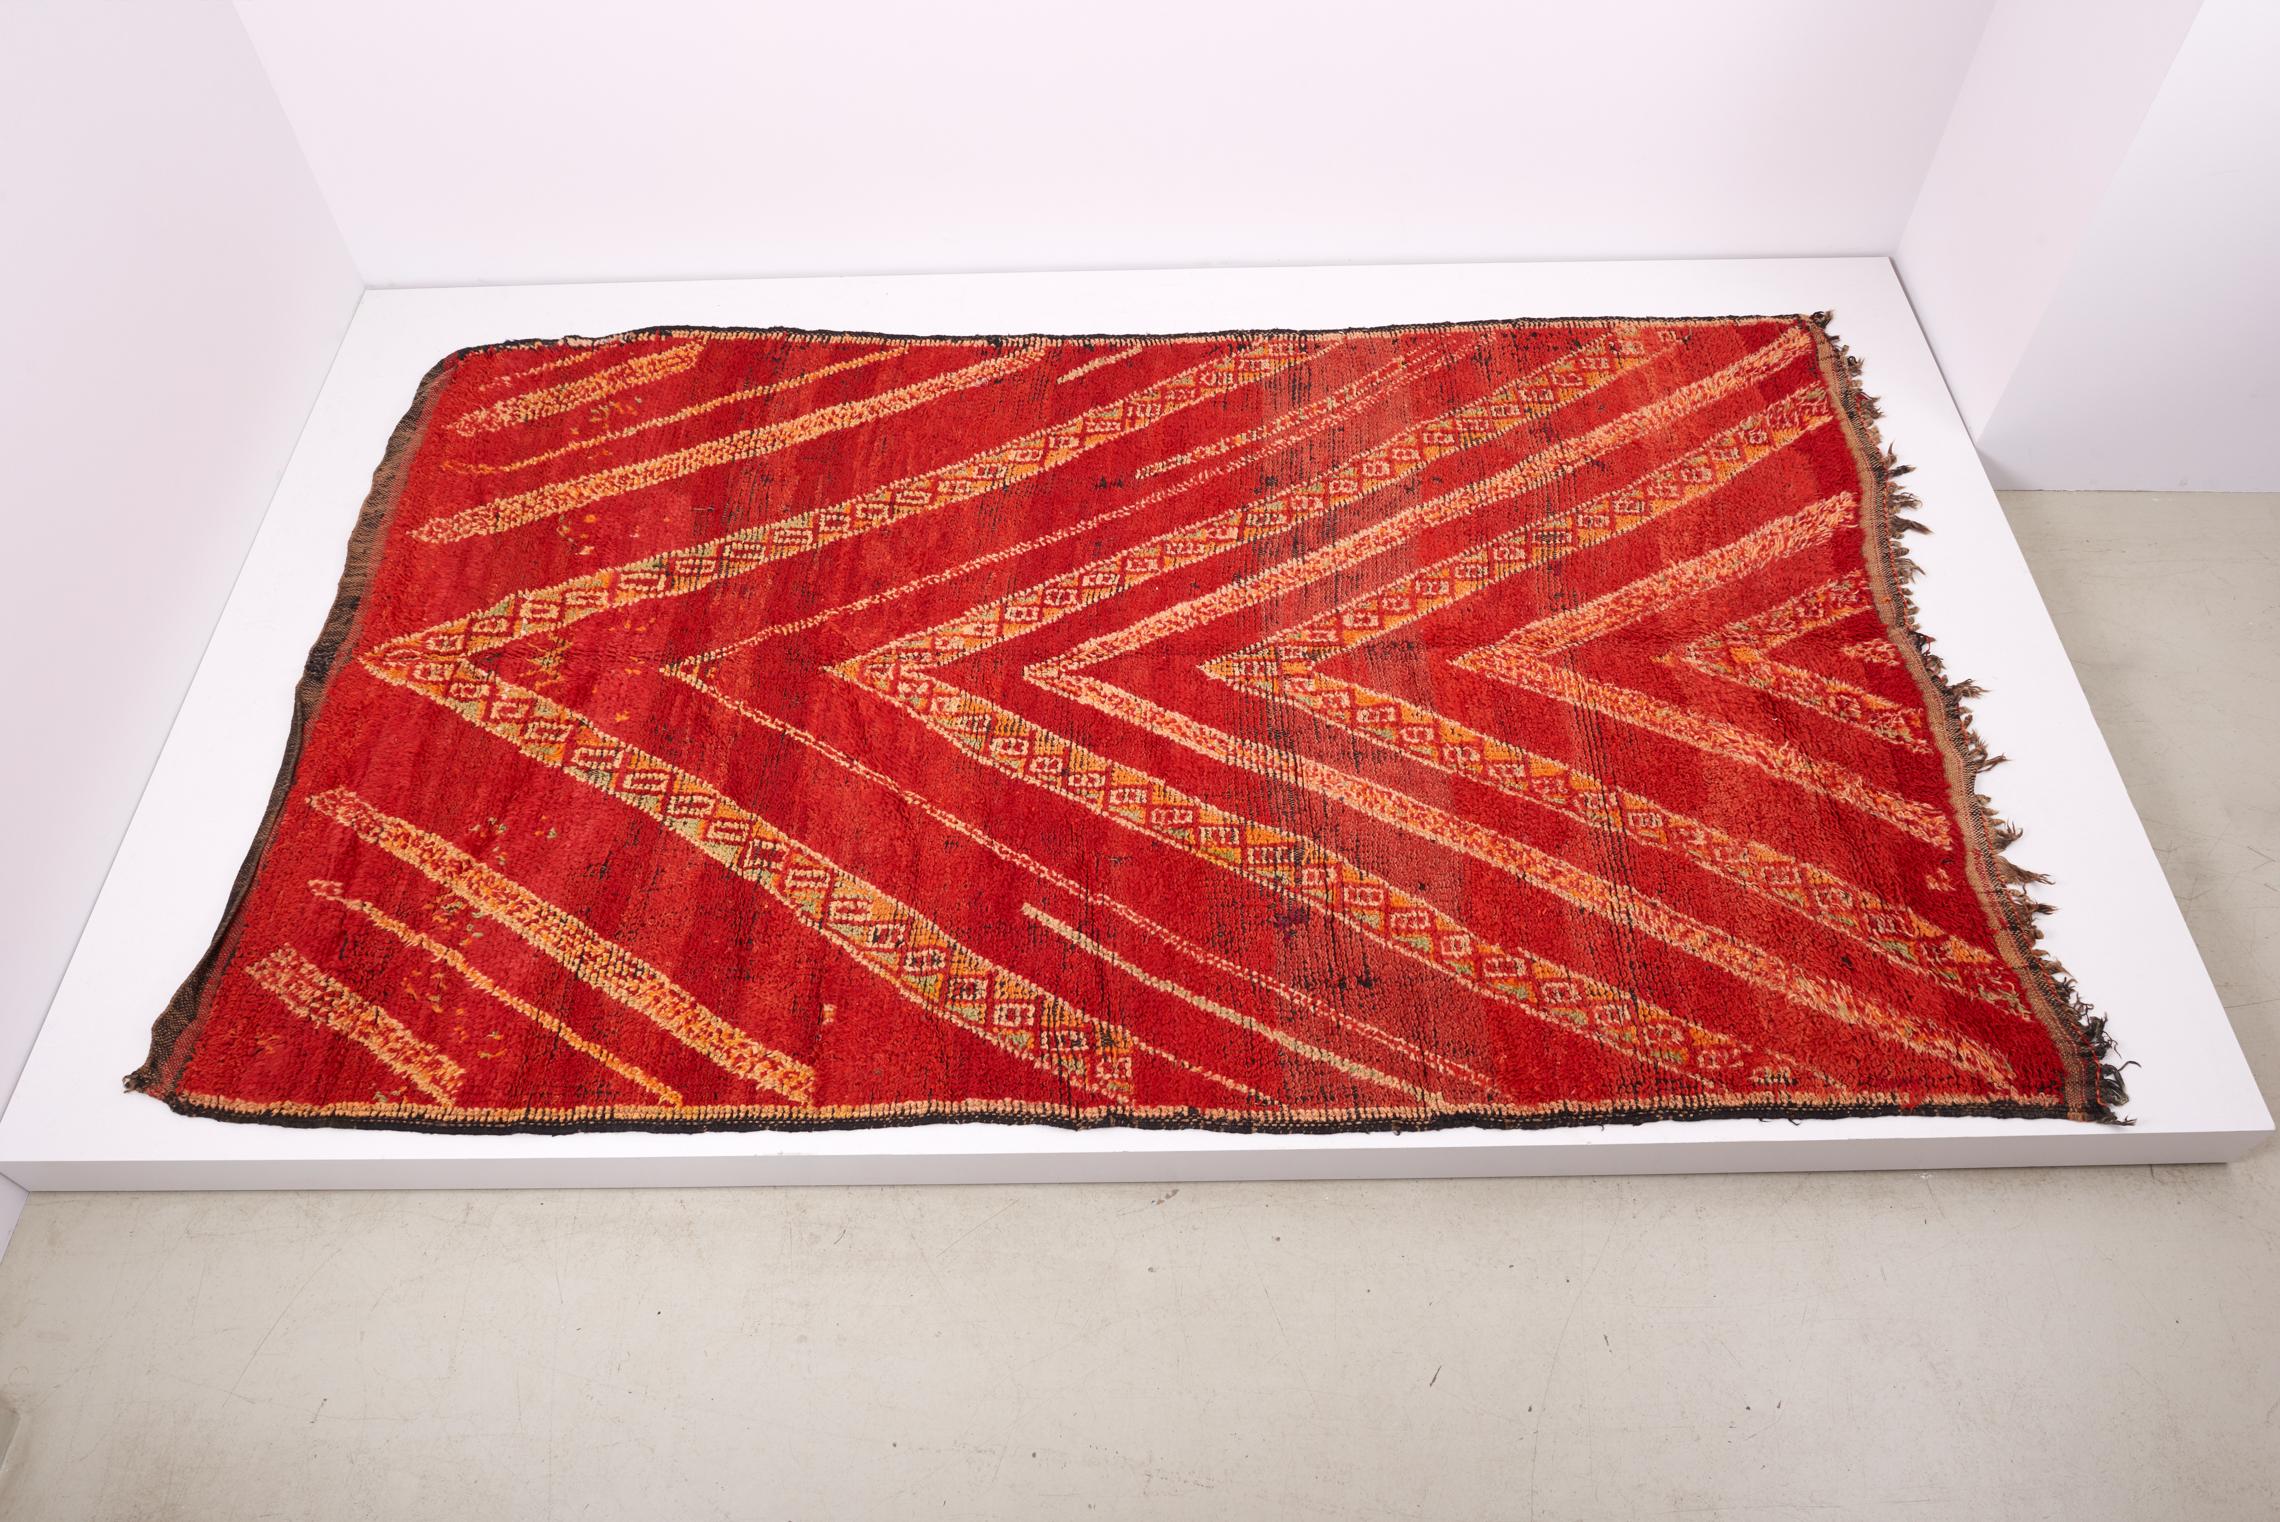 Zaiane carpet made of hand dyed wool in red and yellow. 2nd half 20th century.